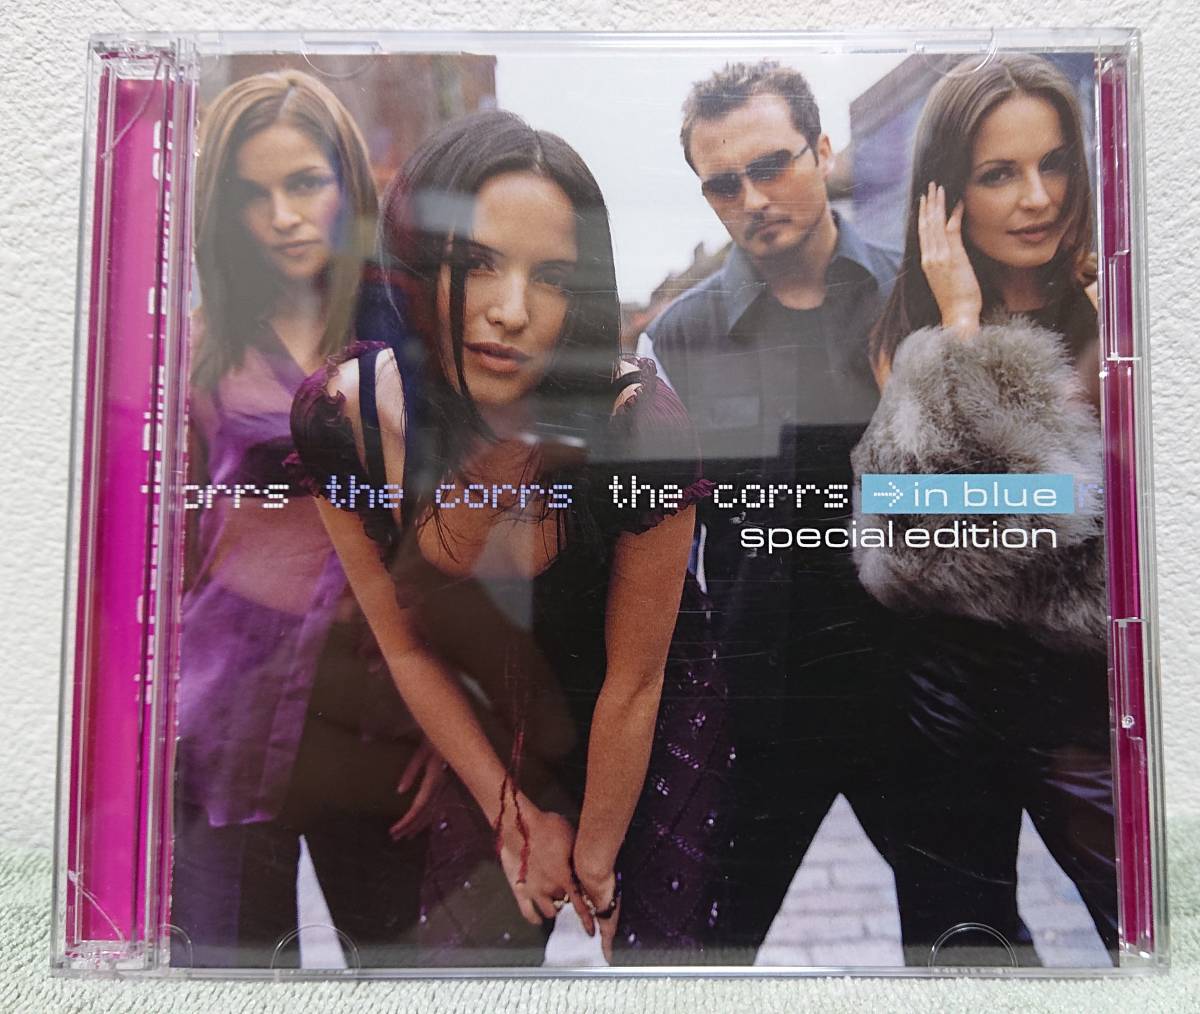 ★THE CORRS/IN BLUE SPECIAL EDITION 2枚組中古CD★_画像1